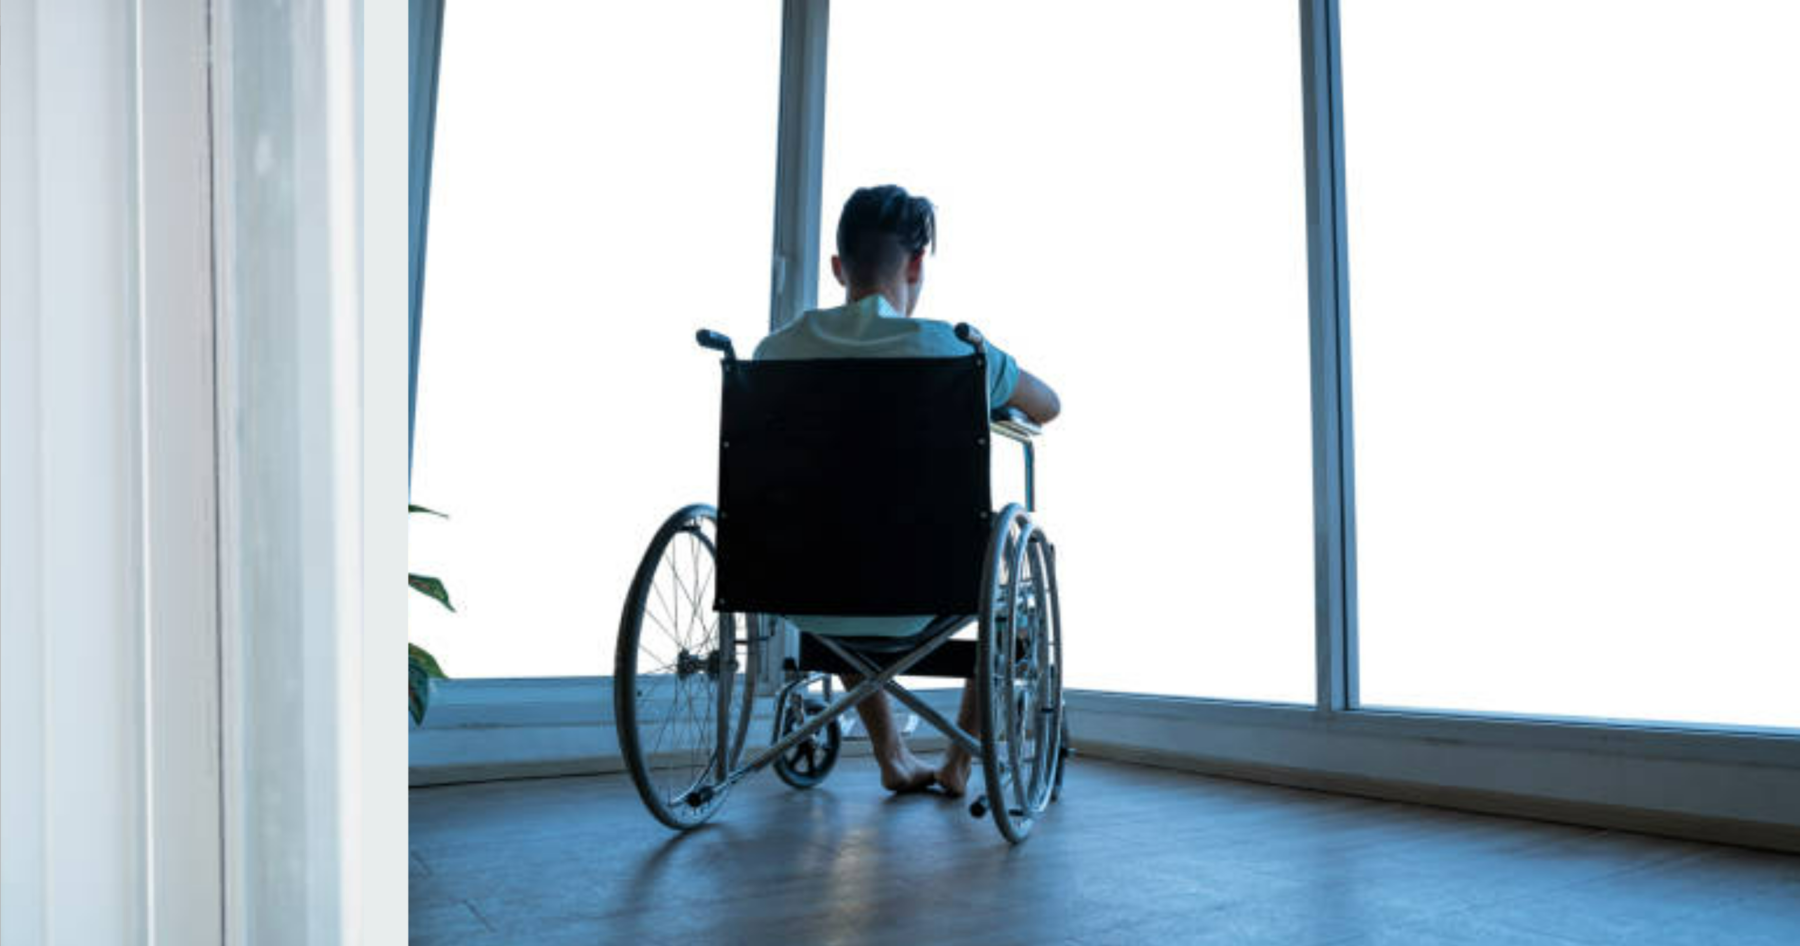 A man sits in a wheelchair, with his back to the viewer, looking out large windows in an institutional setting